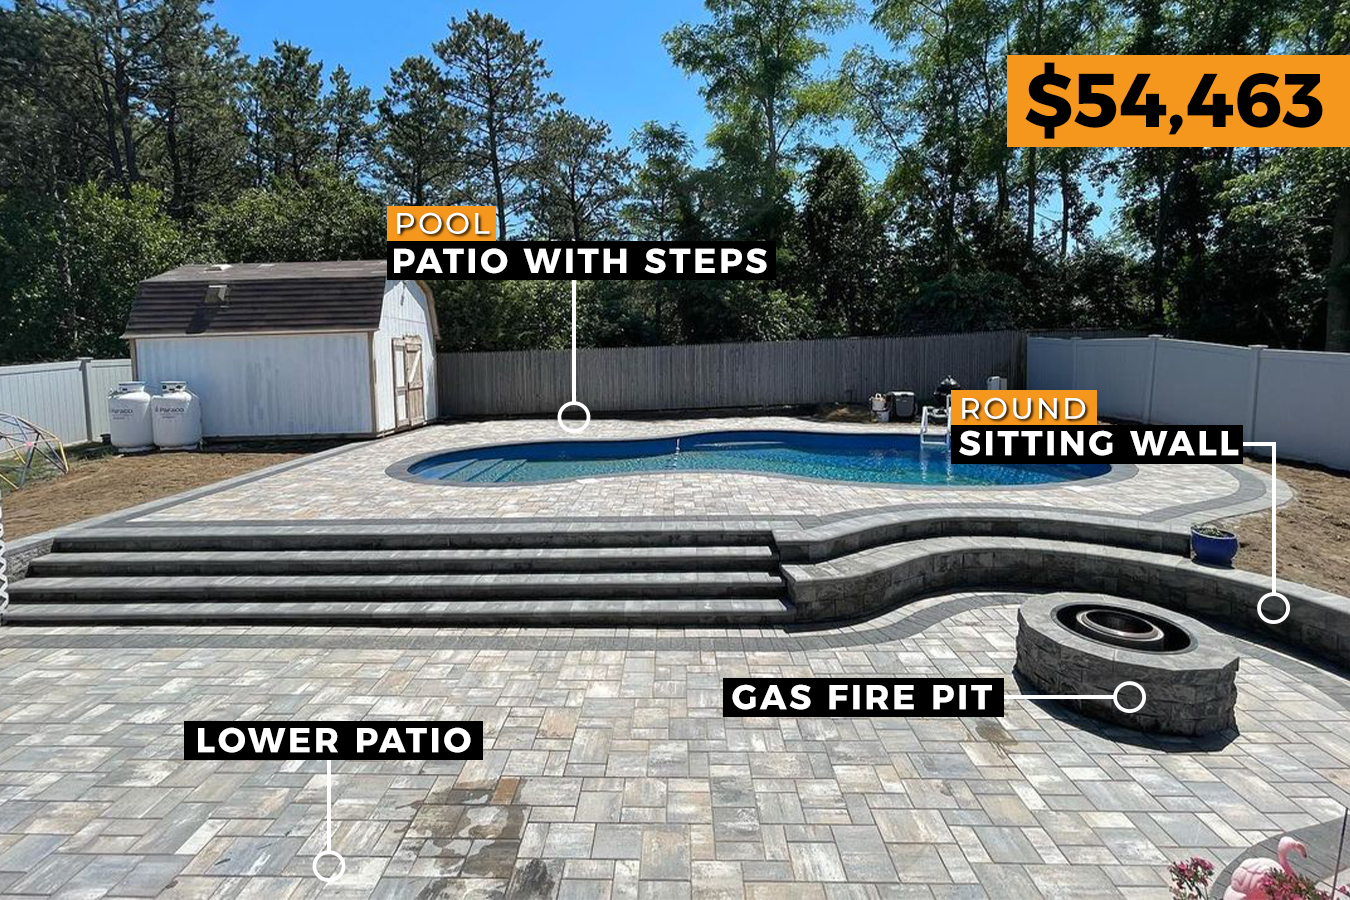 Pool patio installers near me, Pool patio installer, A flagstone walkway leads to a charming gazebo, surrounded by colorful flowers and greenery. | paver walkway installation